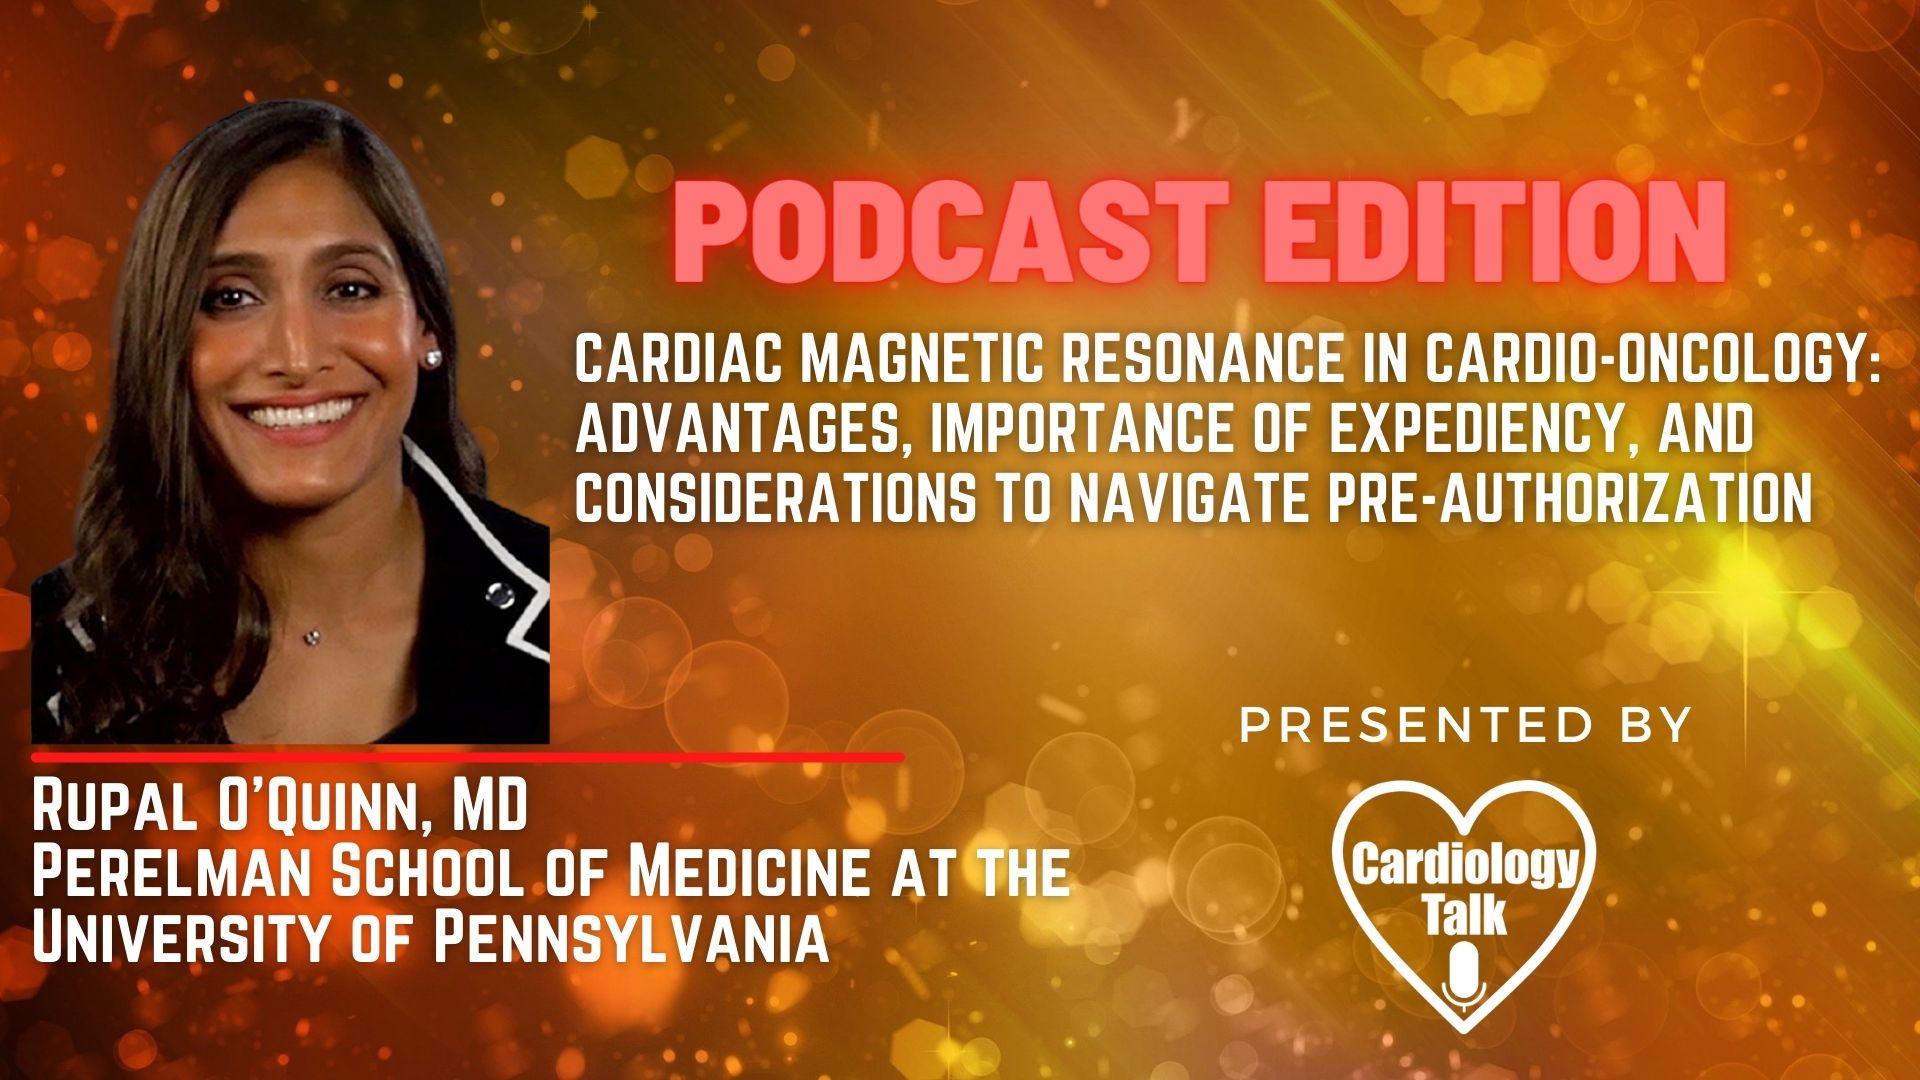 Podcast- Dr. Rupal O’Quinn- Cardiac Magnetic Resonance in Cardio-Oncology: Advantages, Importance of Expediency, and Considerations to Navigate Pre-Authorization  @RupalOQuinn @VicFerra...